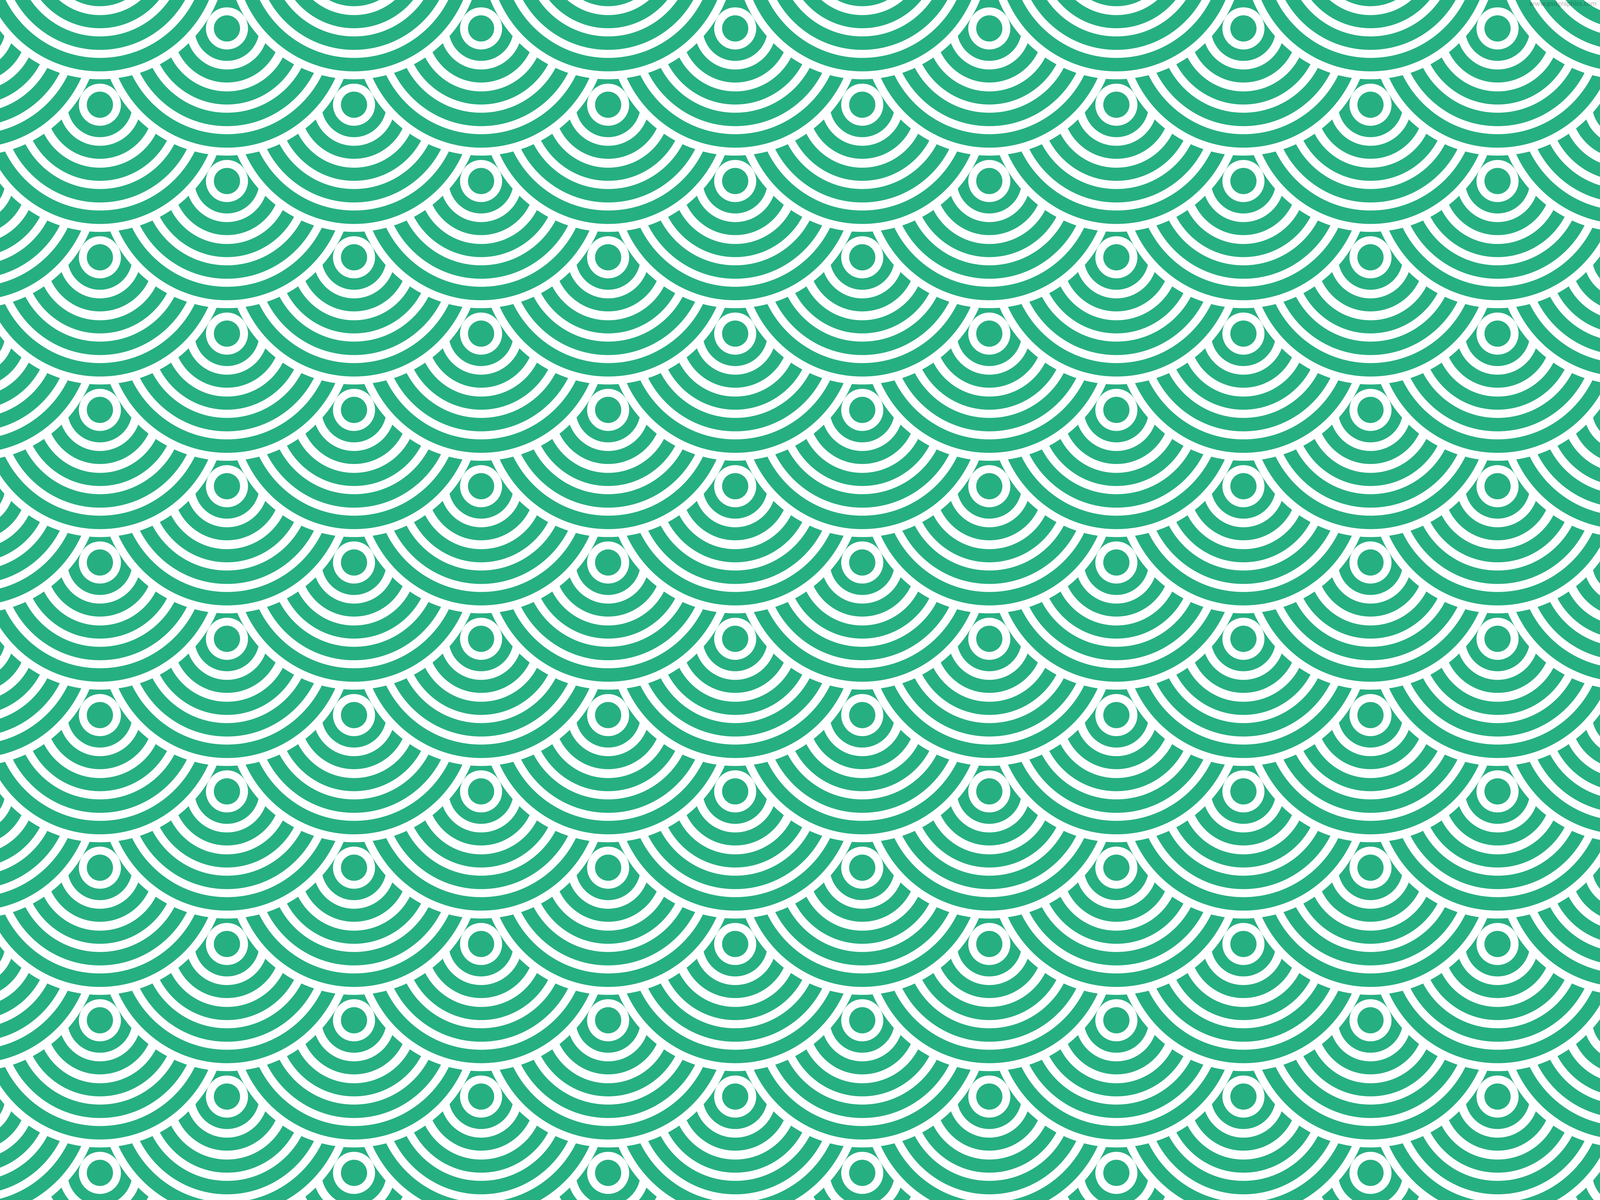 Two spring circles patterns (PSD and AI) - PSDgraphics